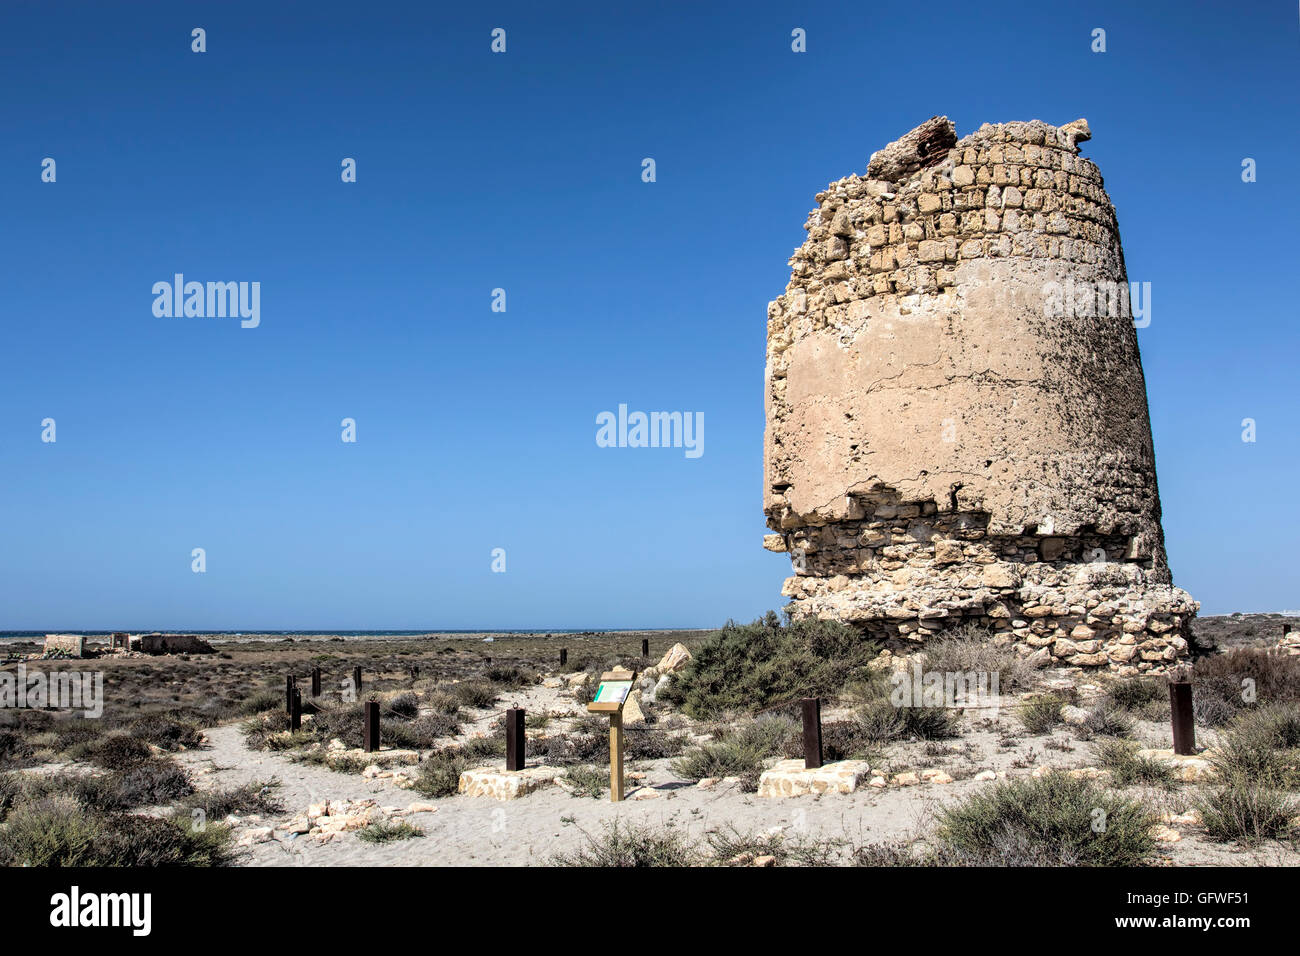 Torre De Cerrillos, Roquetas de Mar. Tower built in the 16th Century to protect the coast from attacks by Barbary Pirates Stock Photo